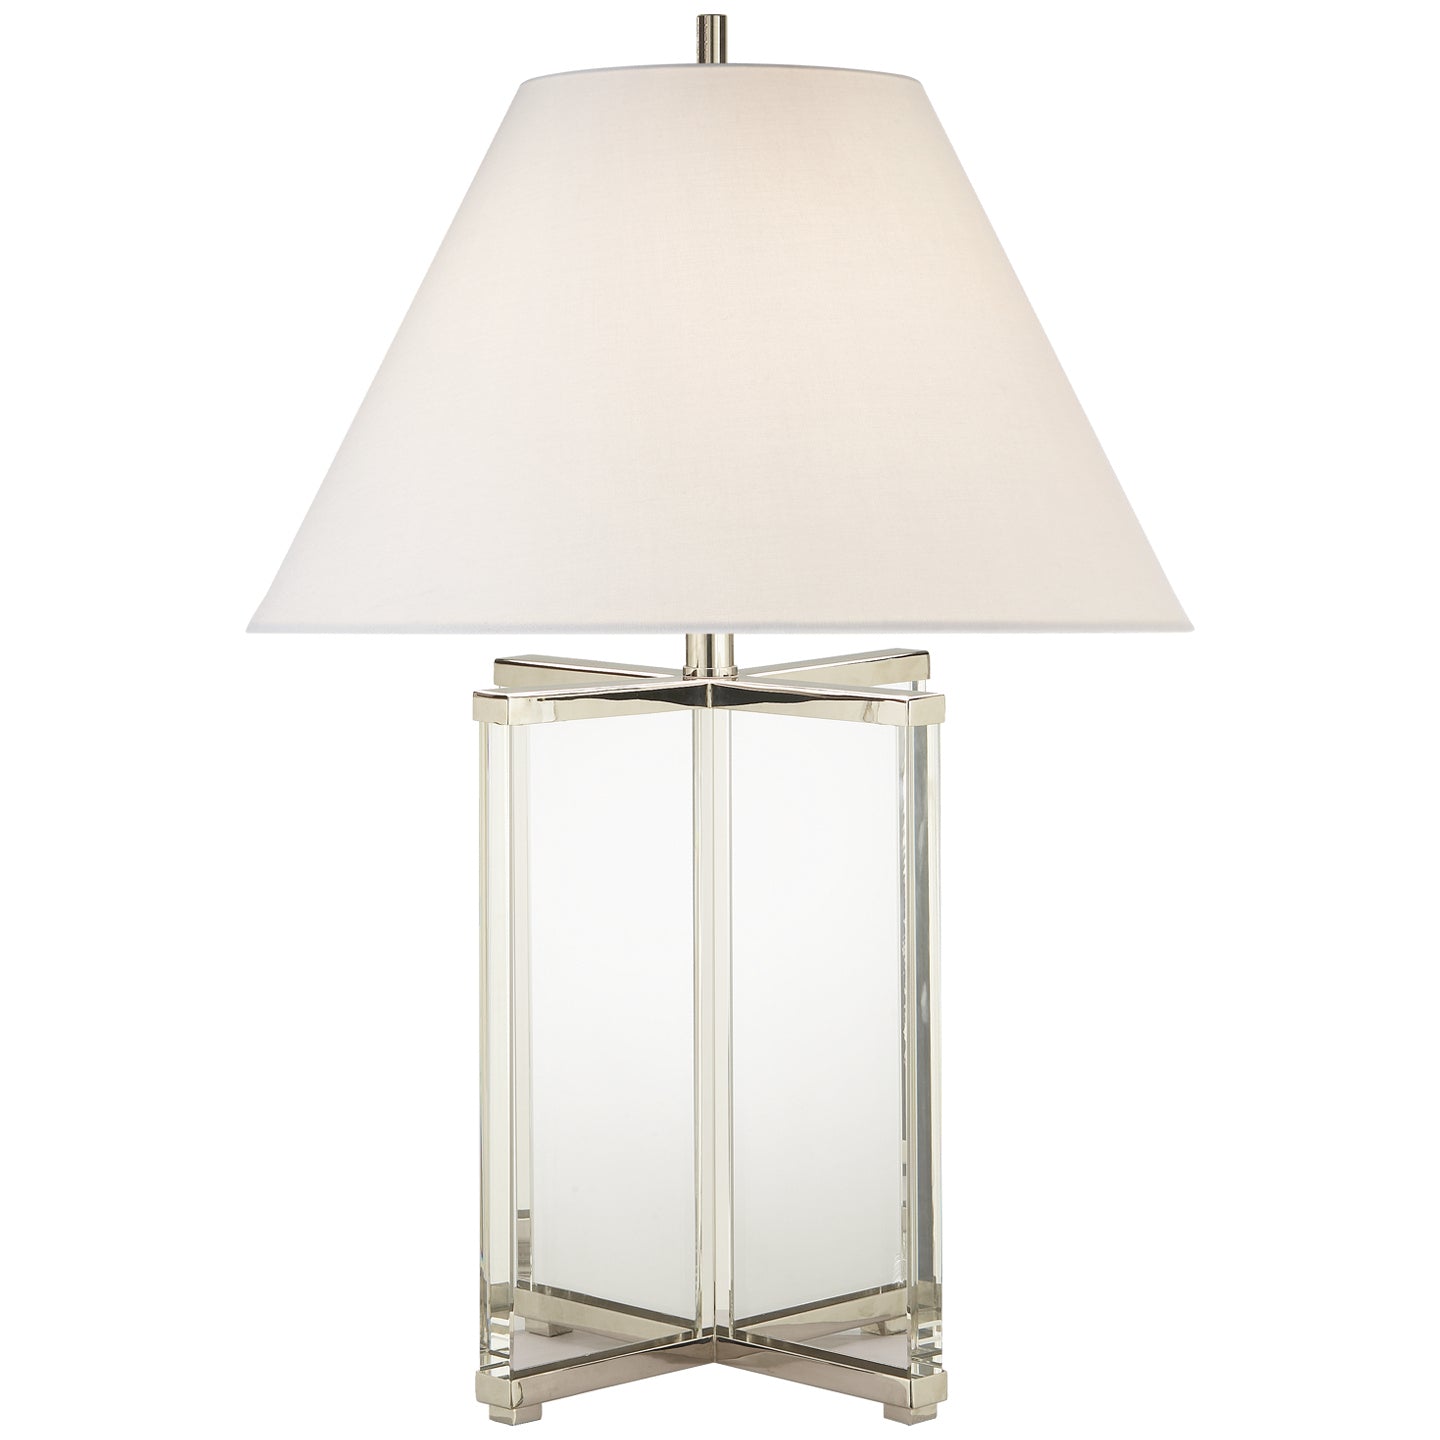 Load image into Gallery viewer, Visual Comfort Signature - SP 3005CG-L - One Light Table Lamp - CAMERON - Crystal
